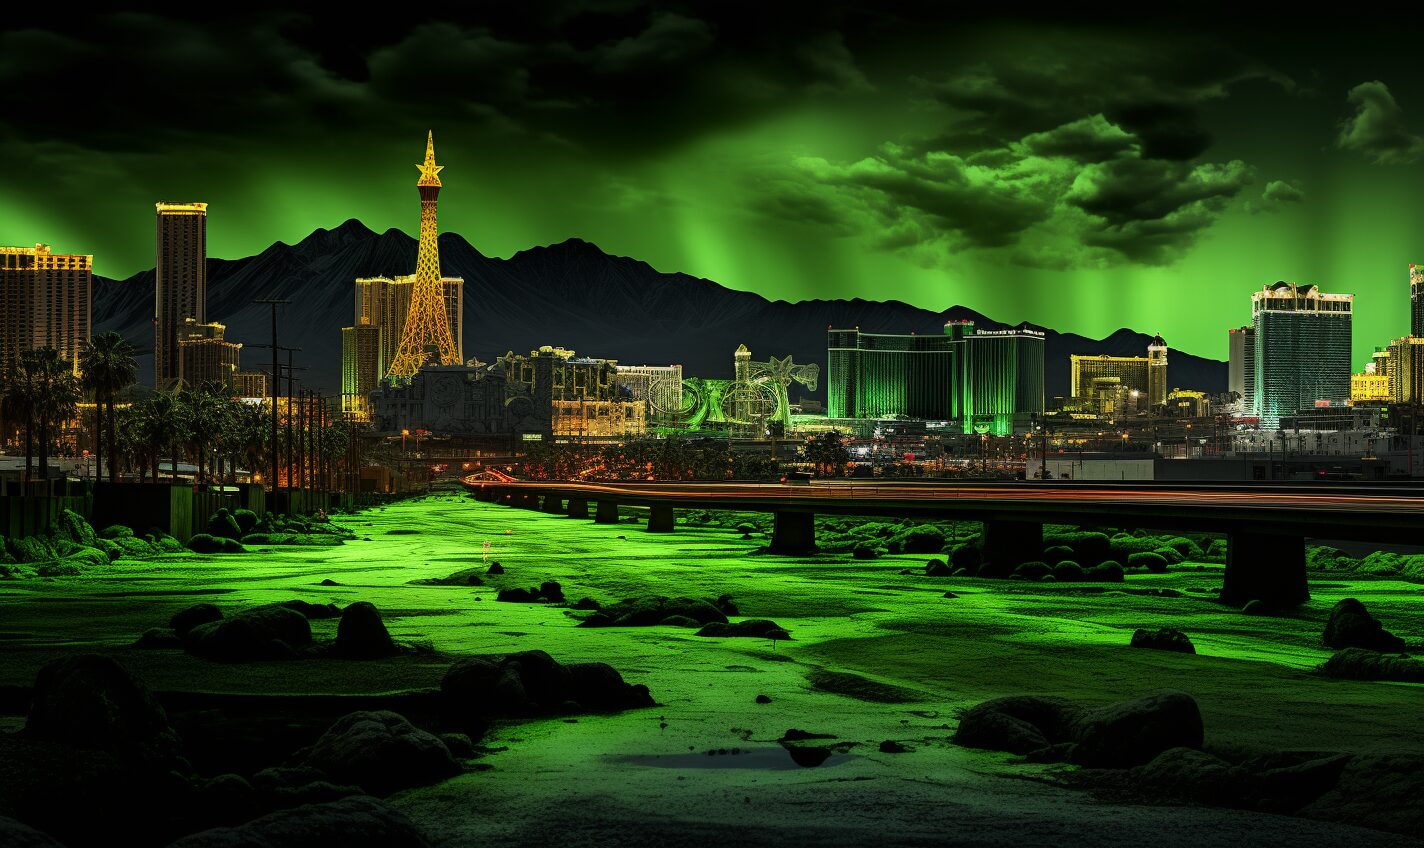 paradise, nevada in a black and neon green glow